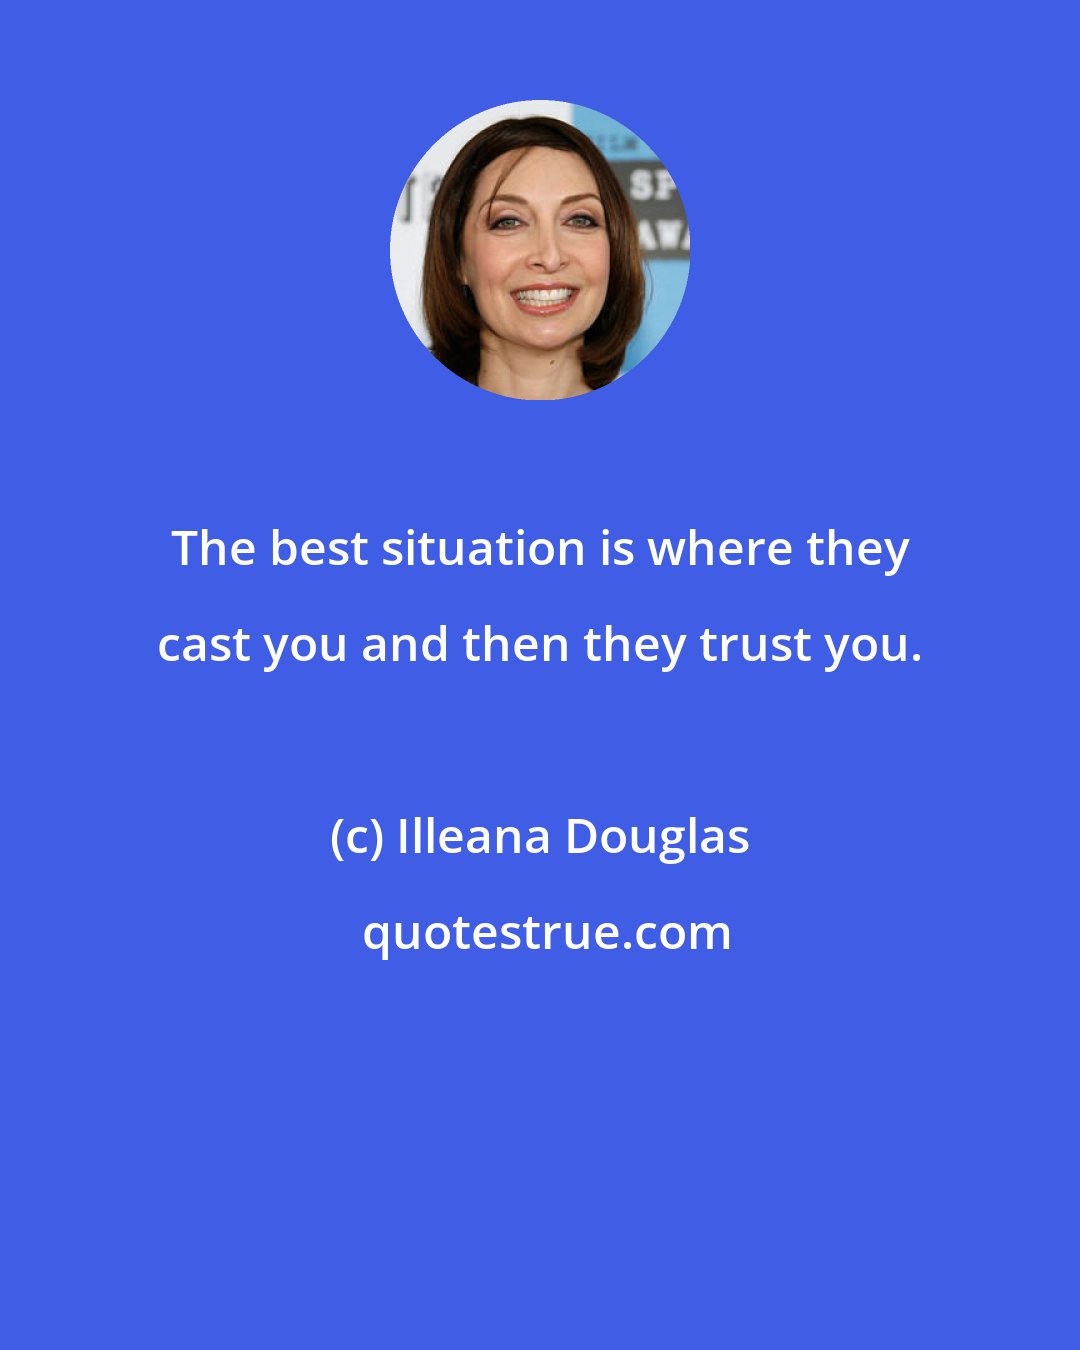 Illeana Douglas: The best situation is where they cast you and then they trust you.